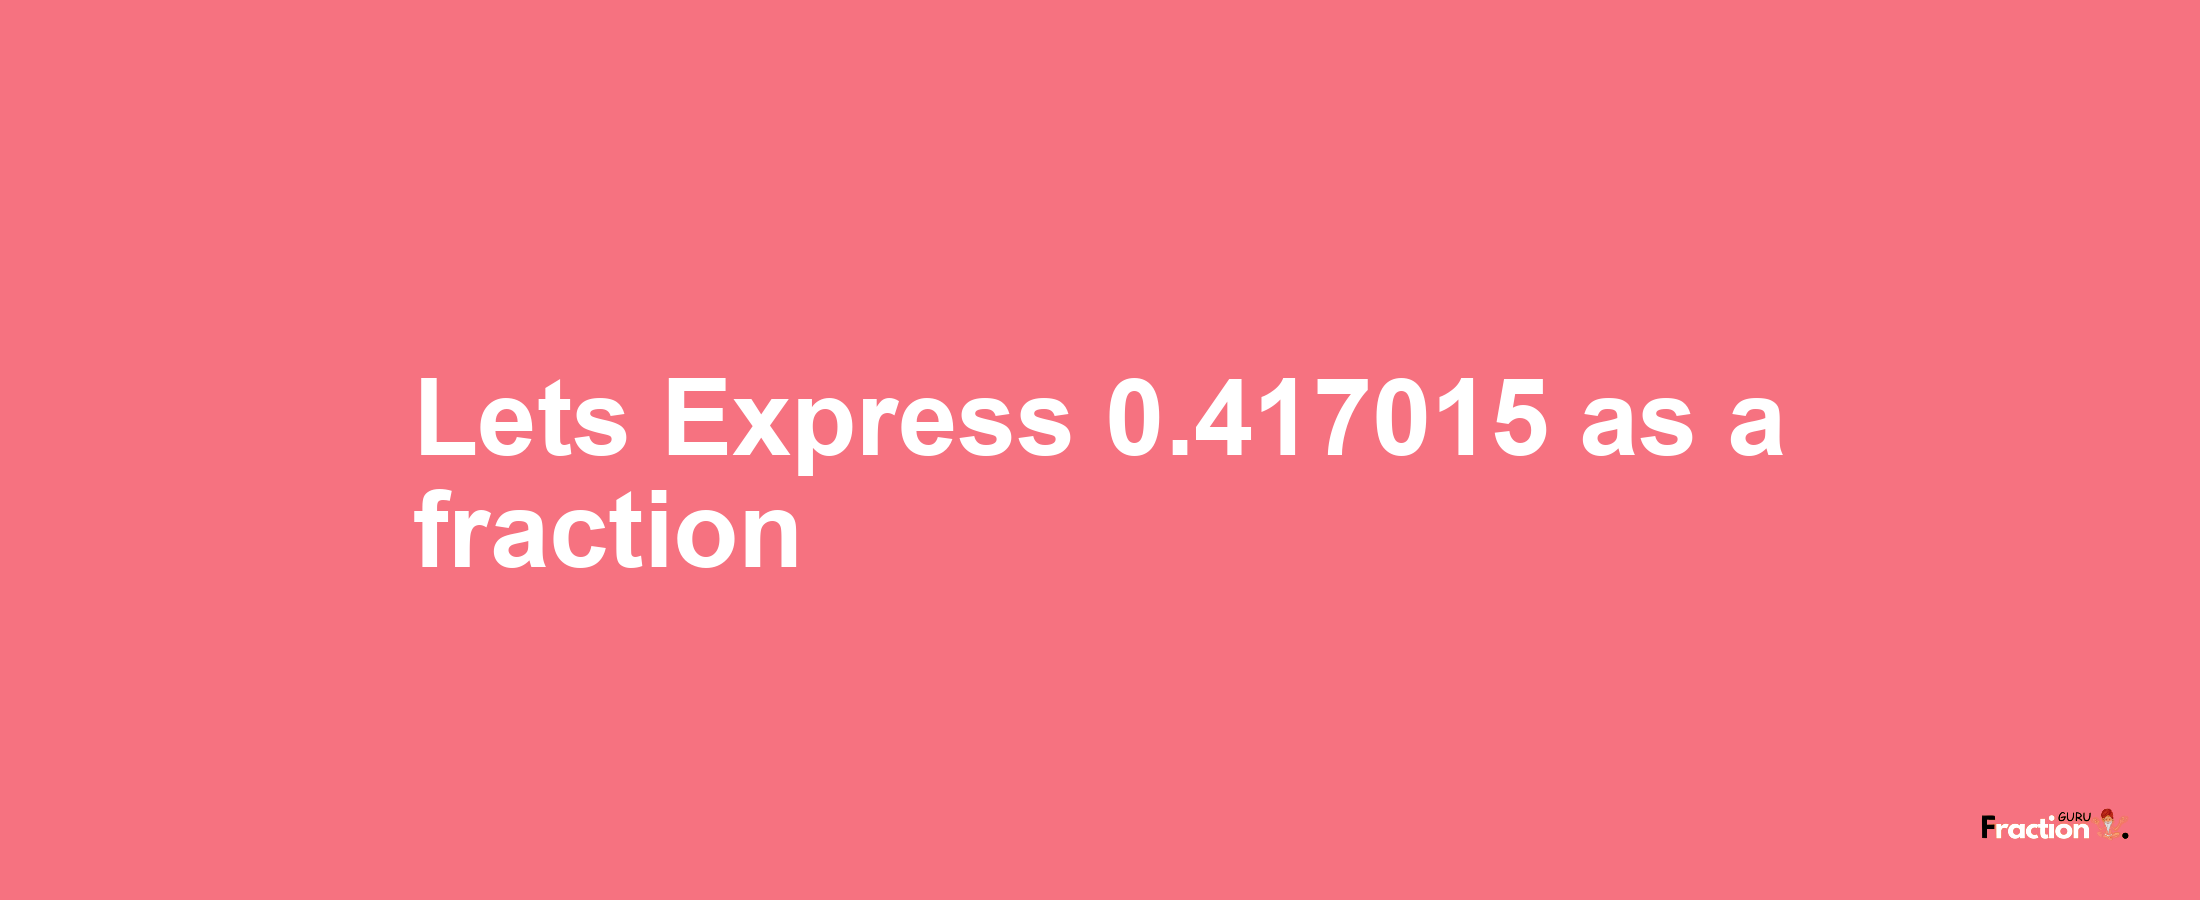 Lets Express 0.417015 as afraction